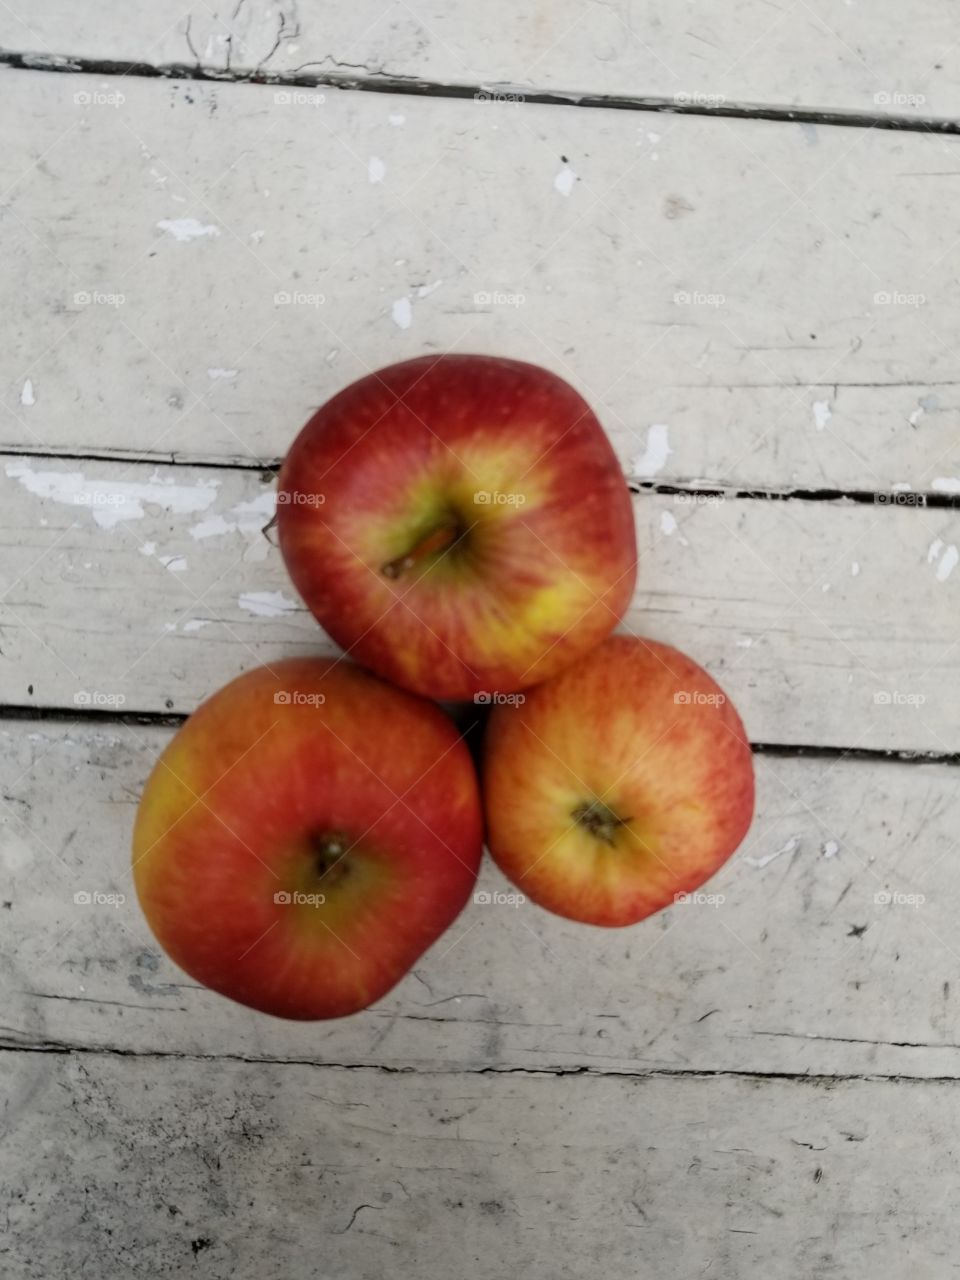 3 red apples